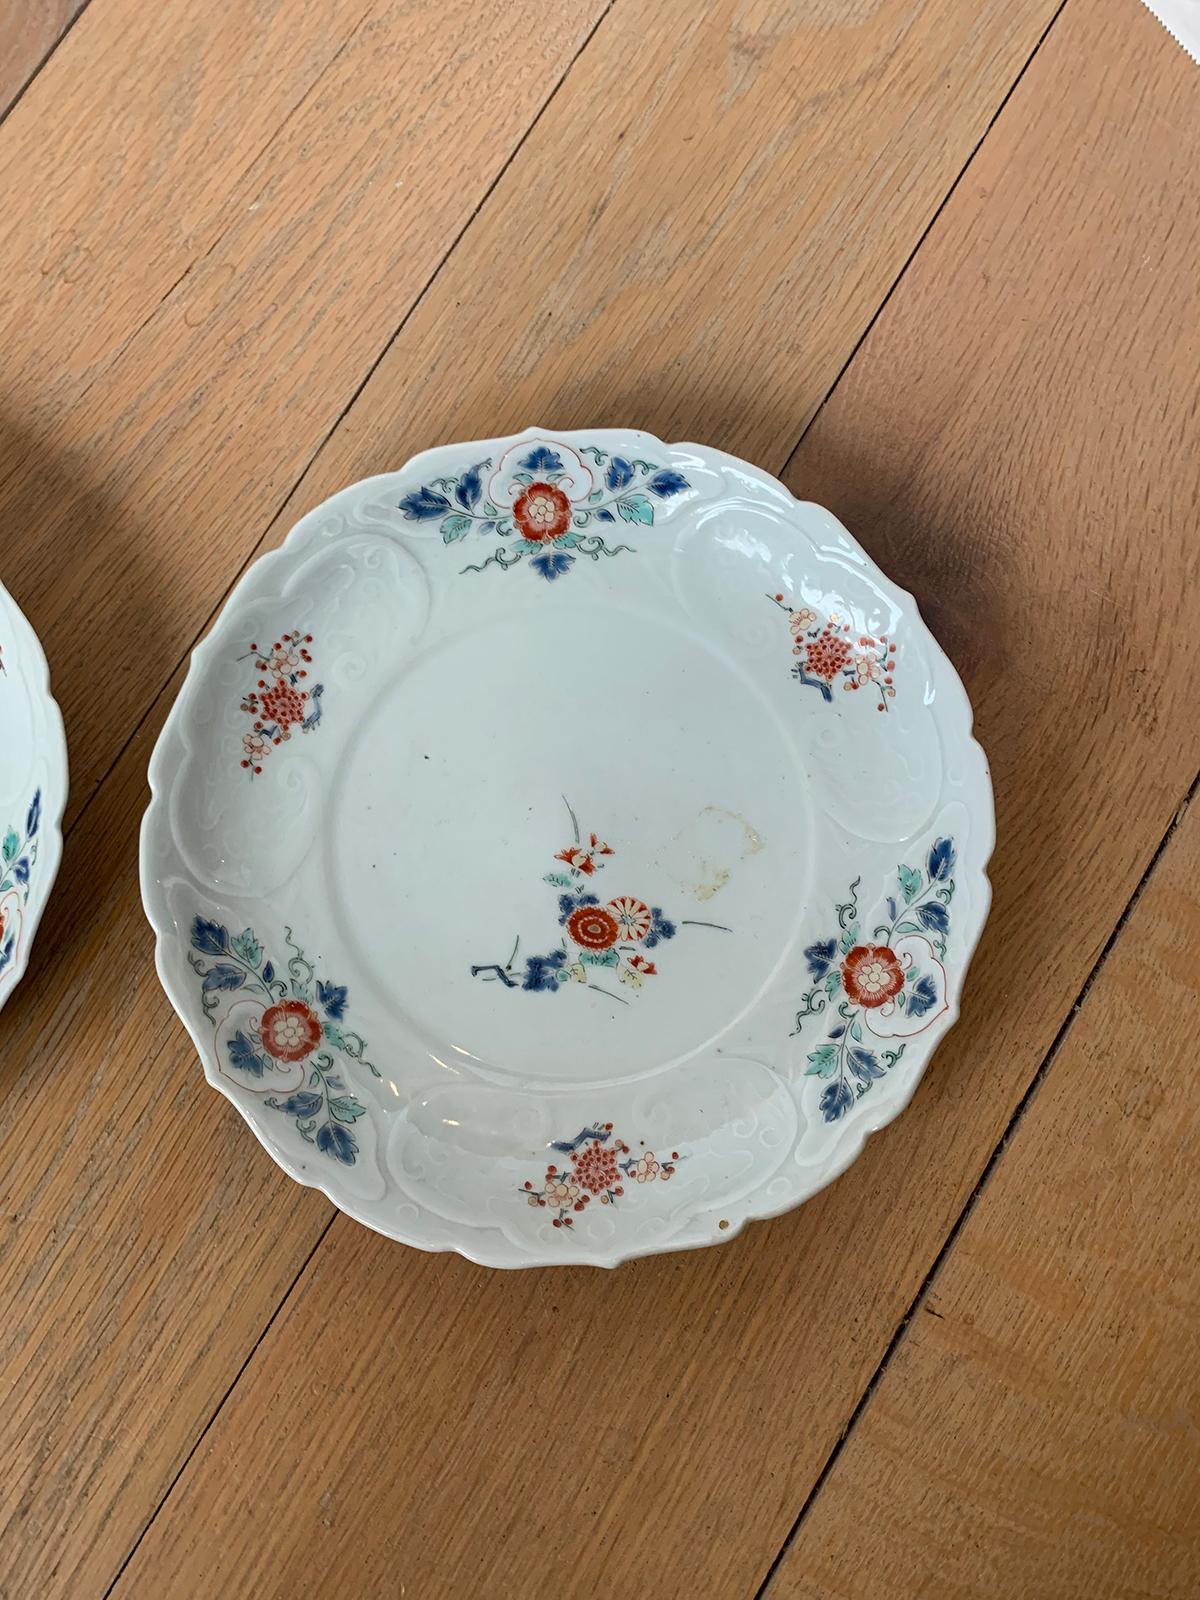 Pair of 19th Century Floral Round Porcelain Plates with Scalloped Edge, Unmarked For Sale 3